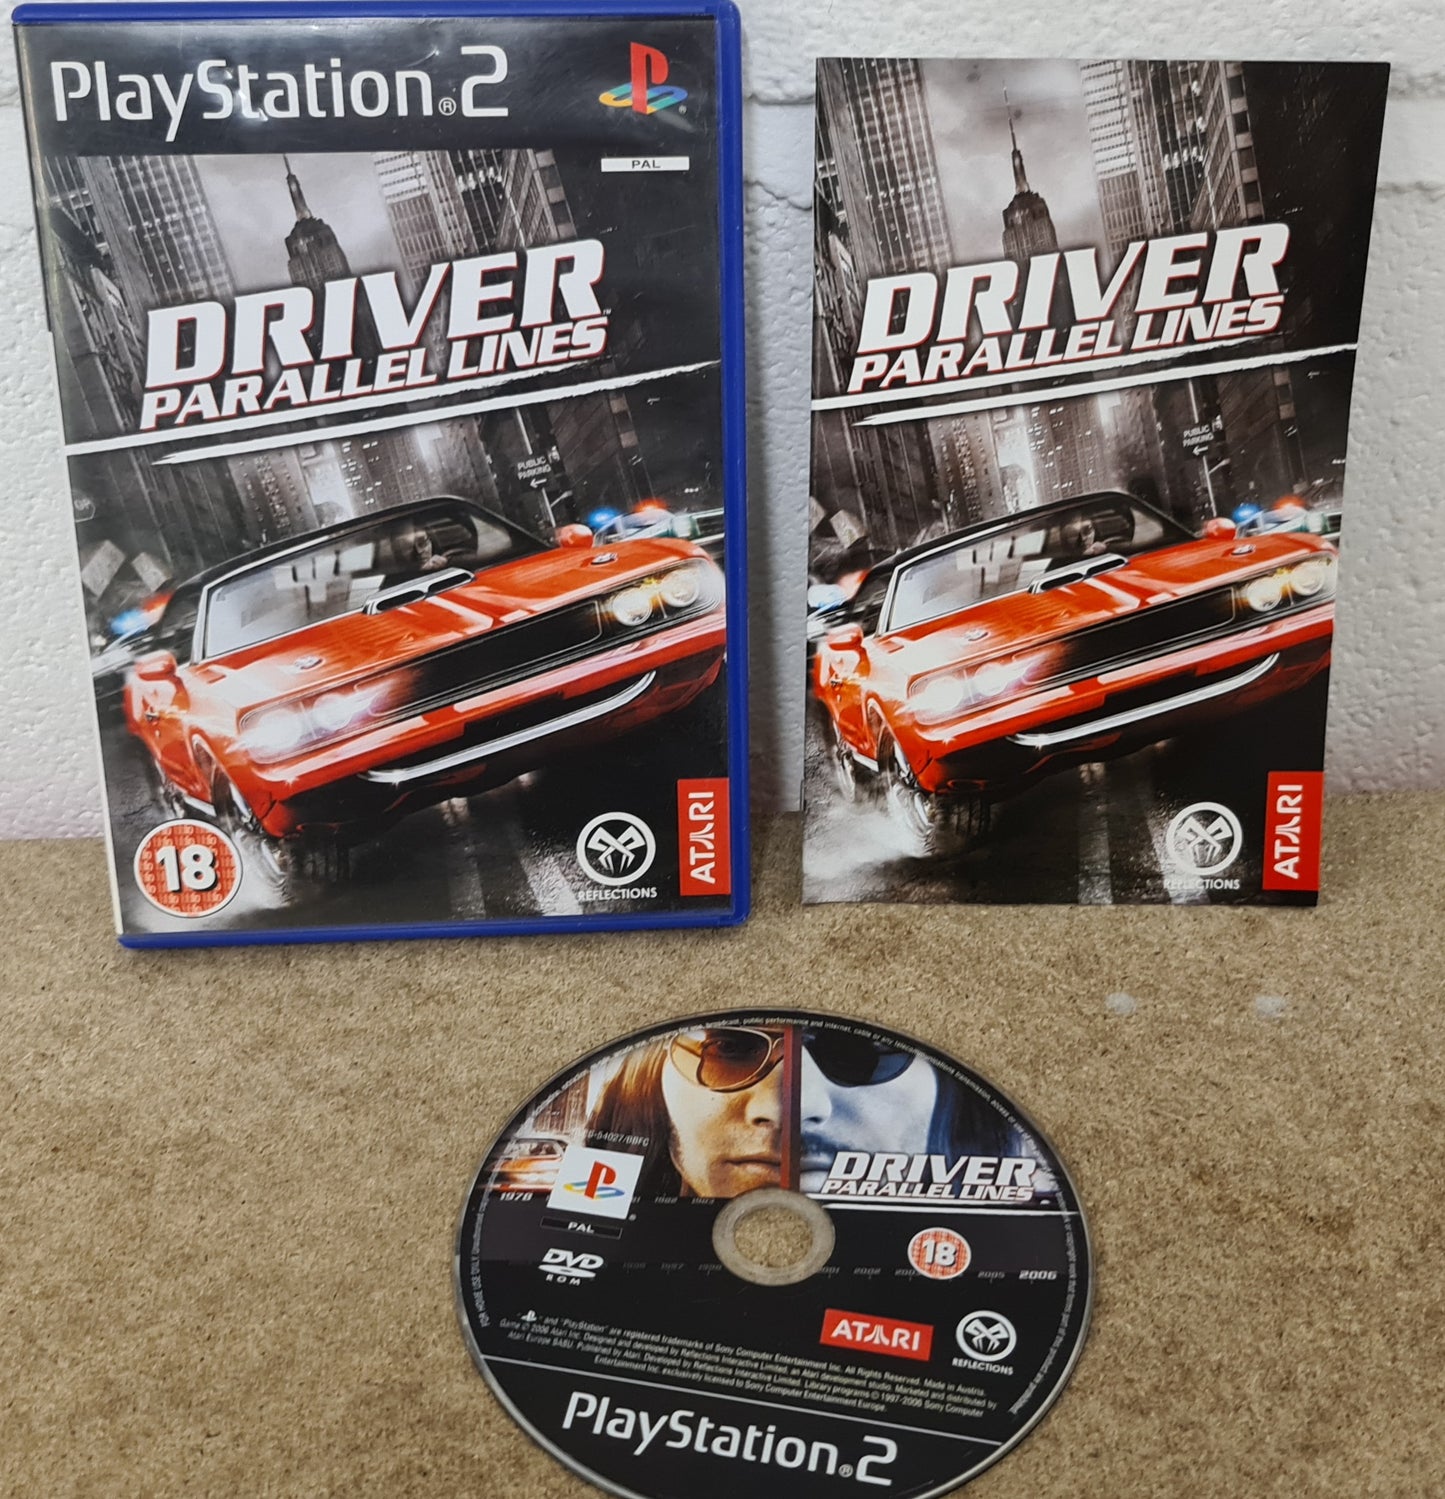 Driver Parallel Lines Sony Playstation 2 (PS2) Game